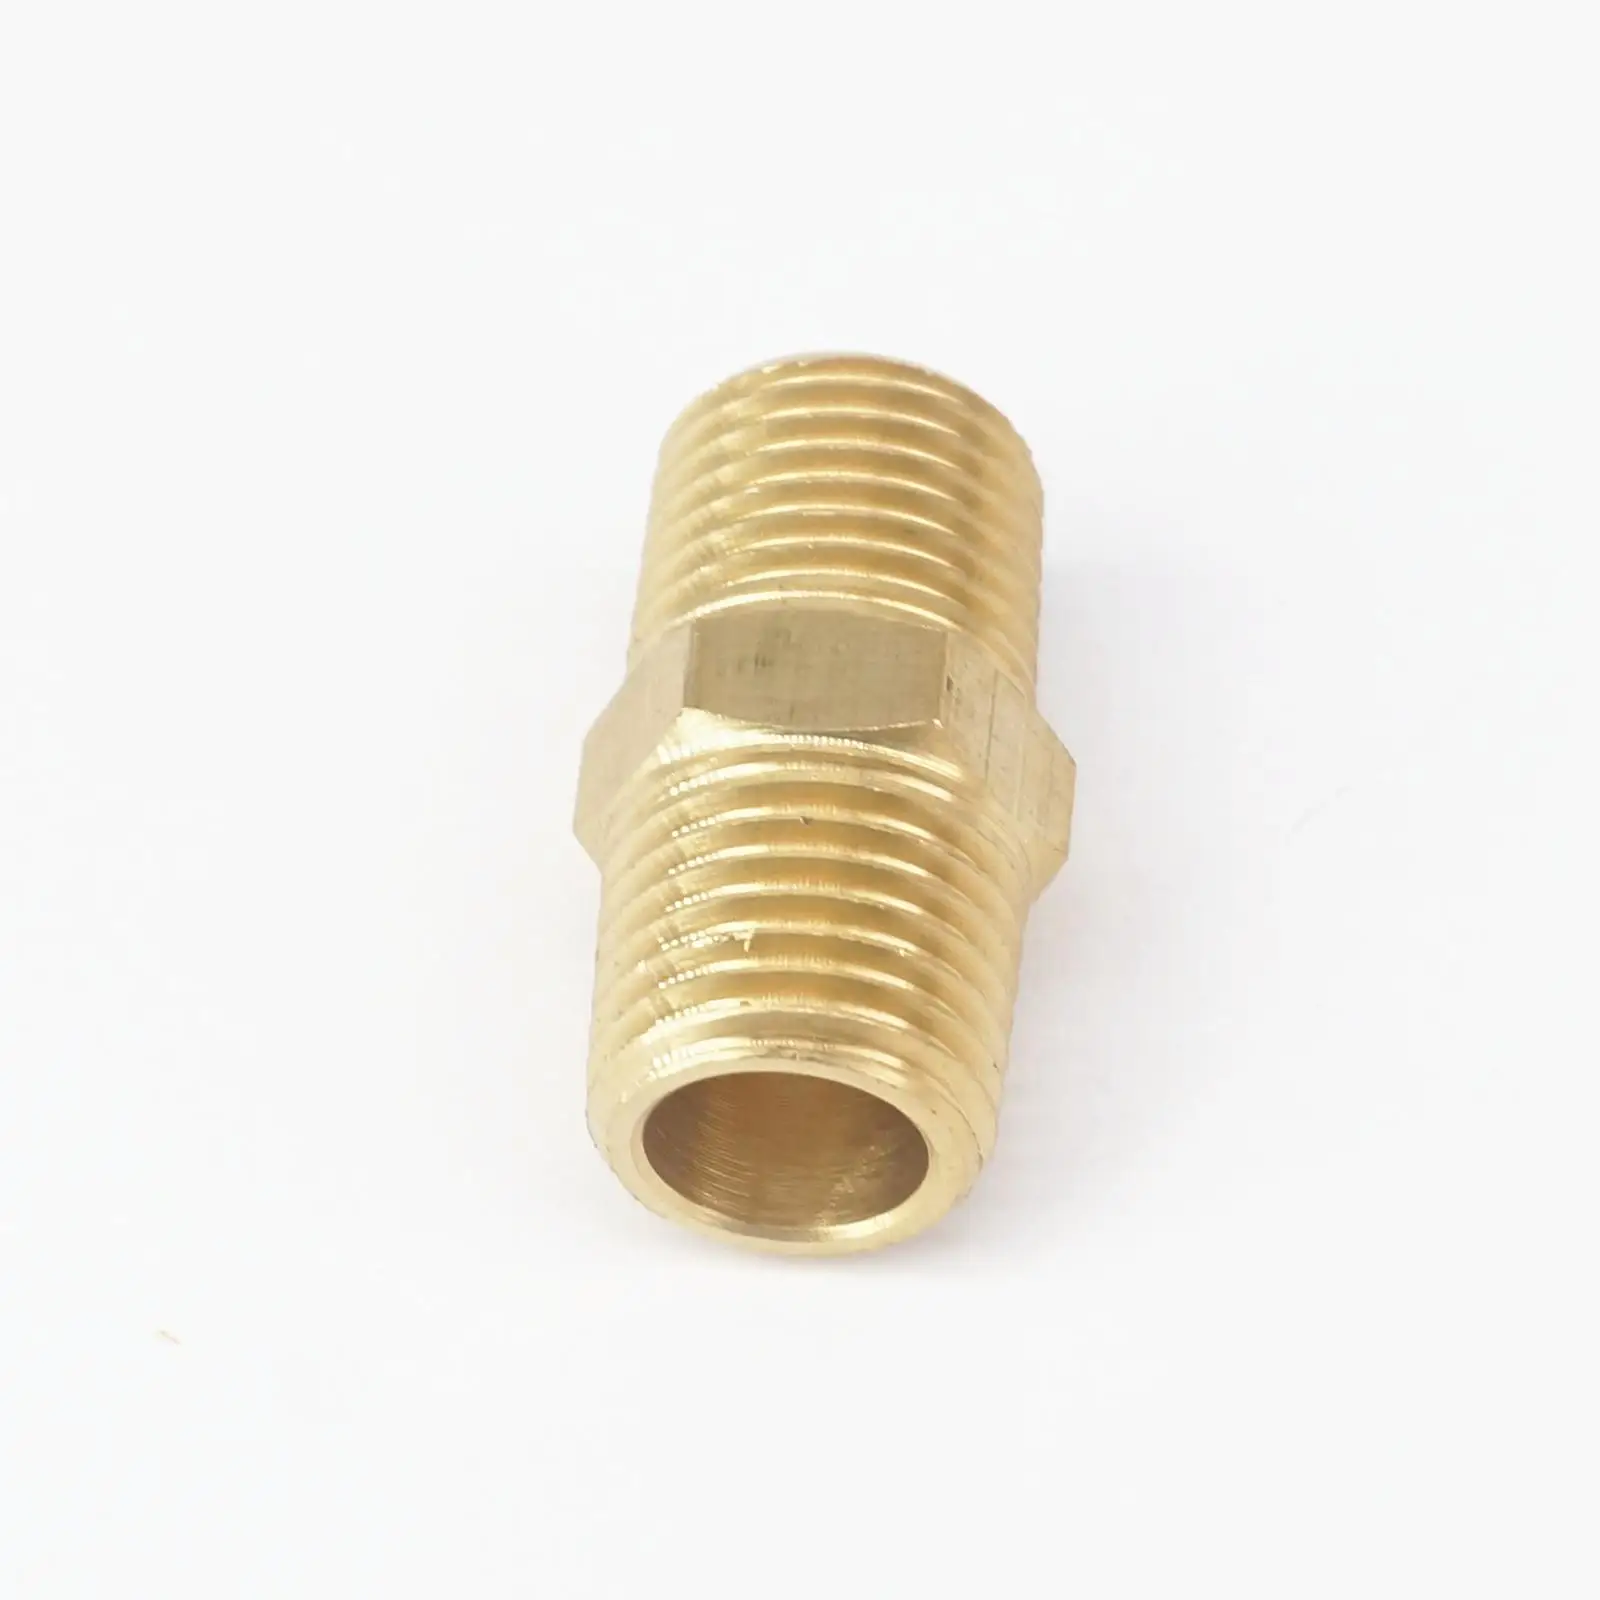 1/8" x 1/4" NPT machined Male Brass Hex Nipple Reducer pipe fitting FA214 791674909149 25 